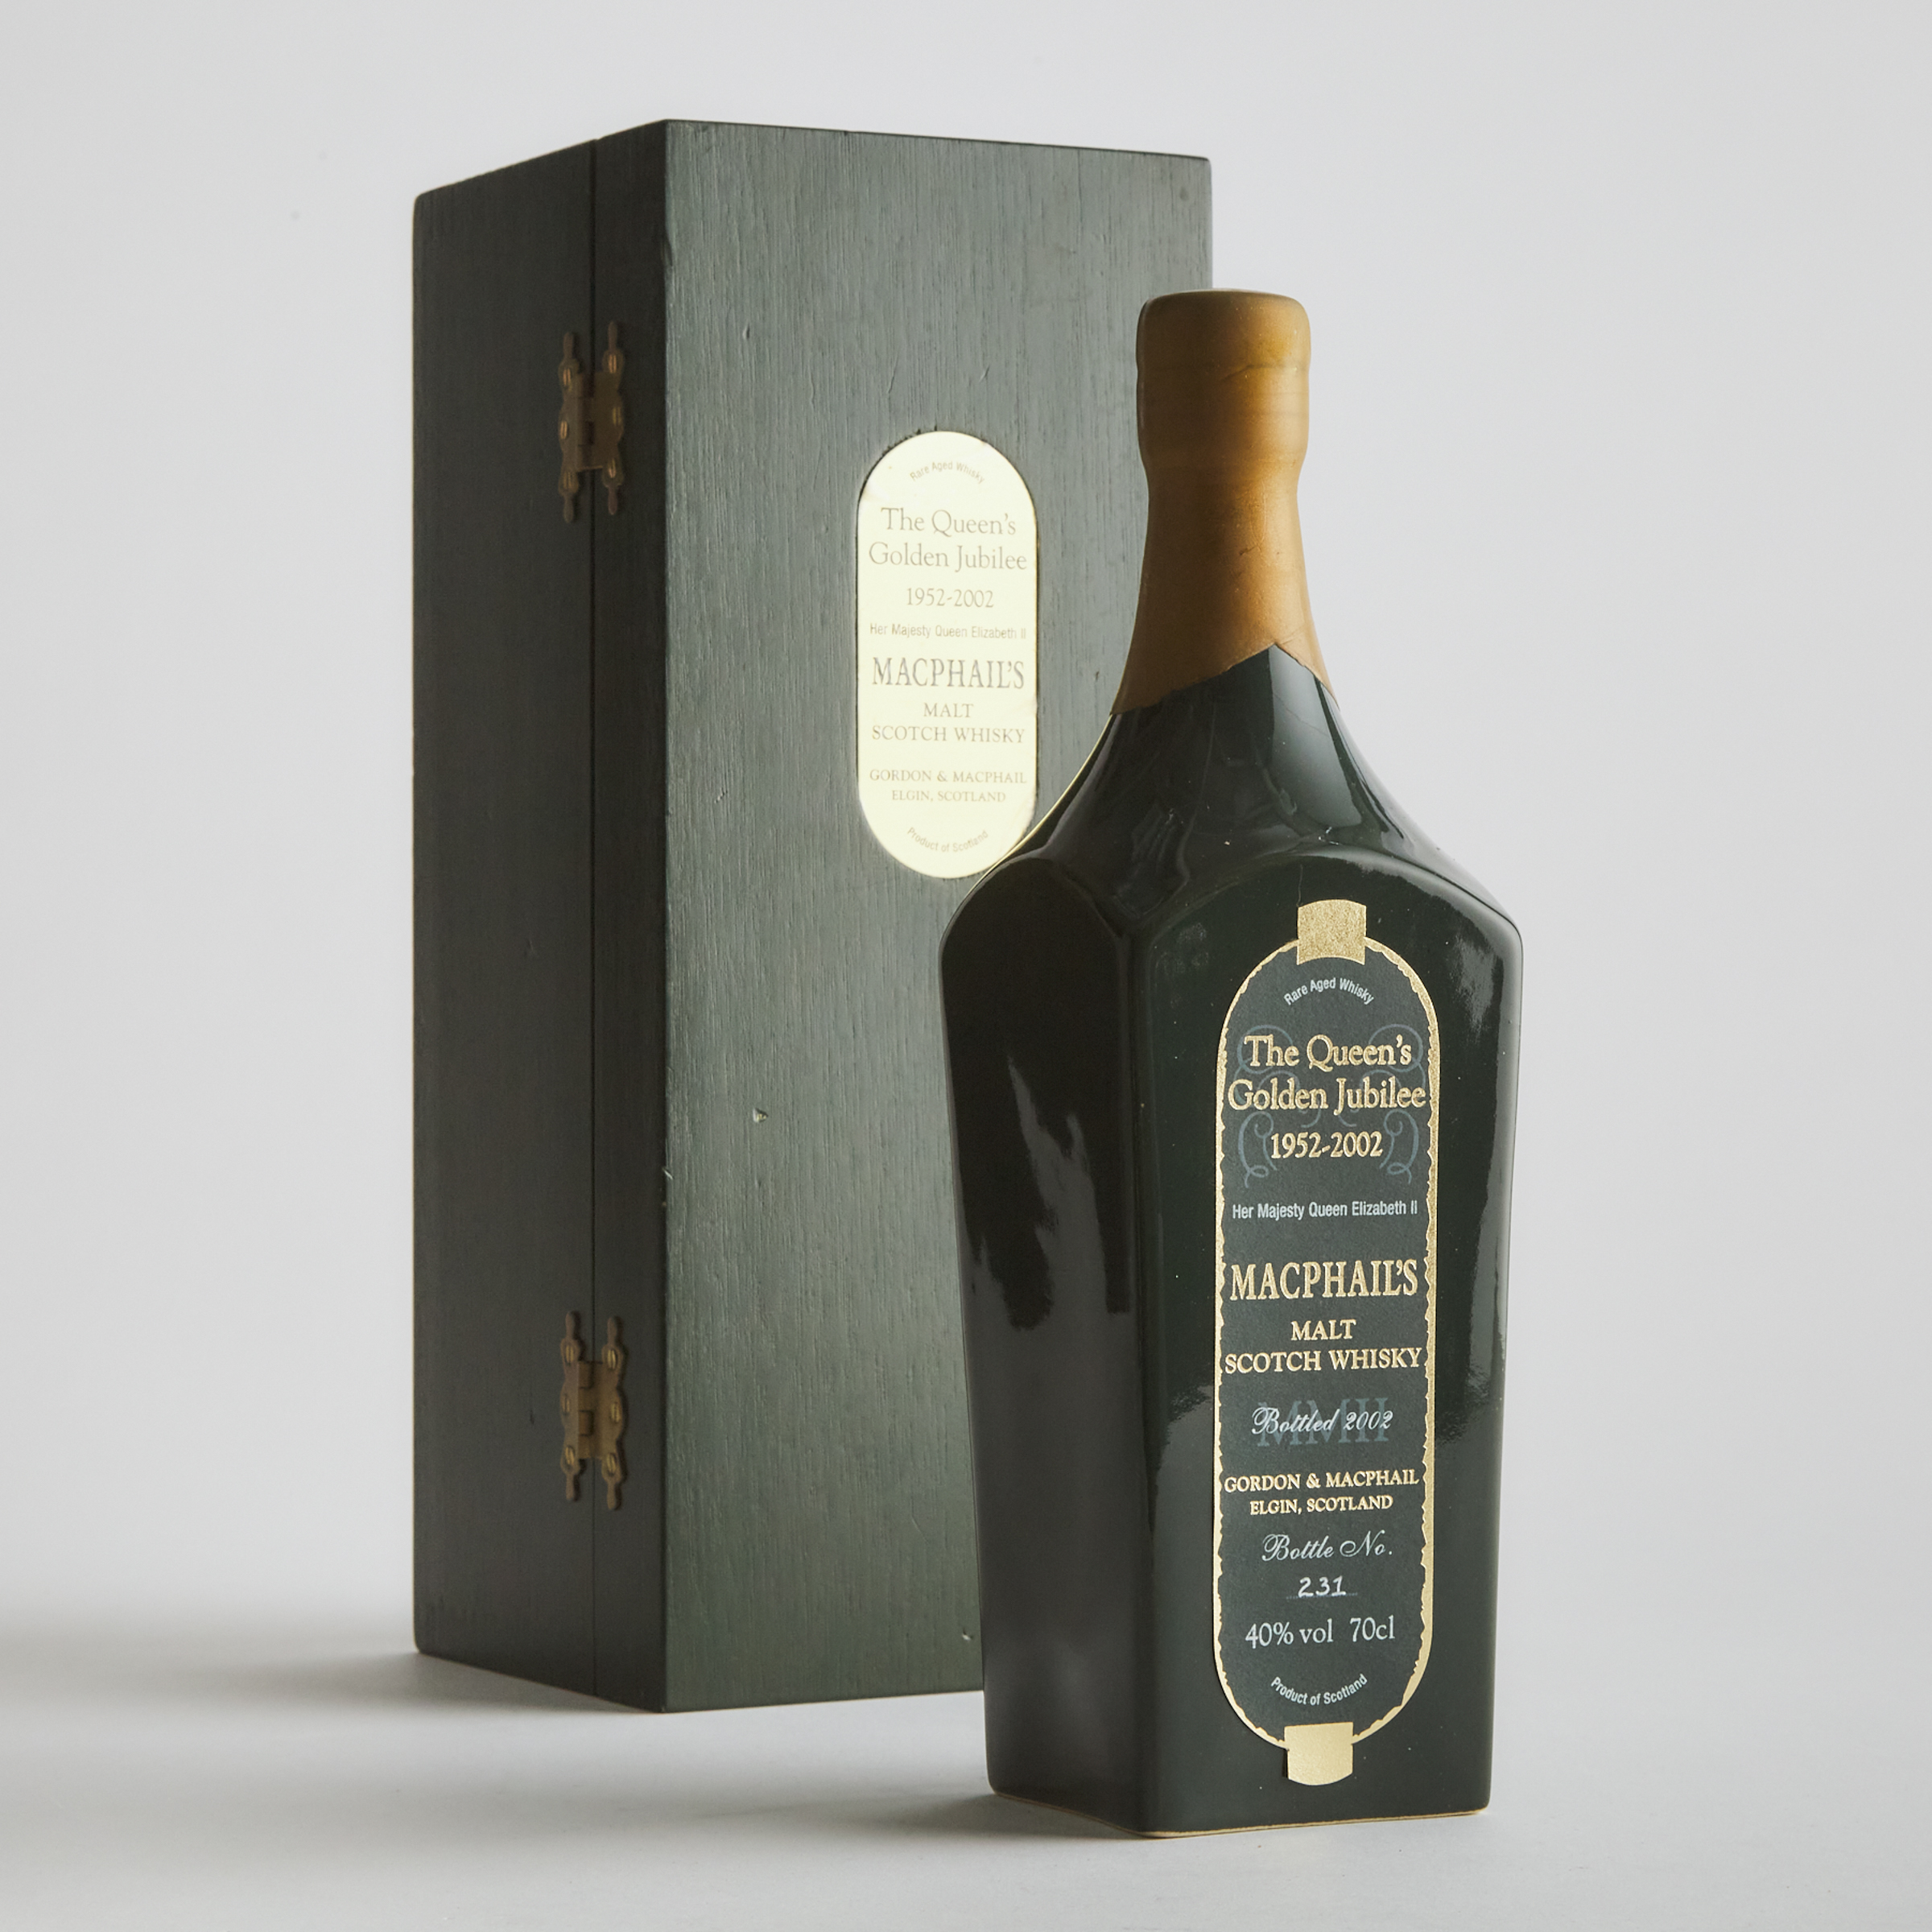 MACPHAIL'S MALT SCOTCH WHISKY 50 YEARS (ONE 70 CL)